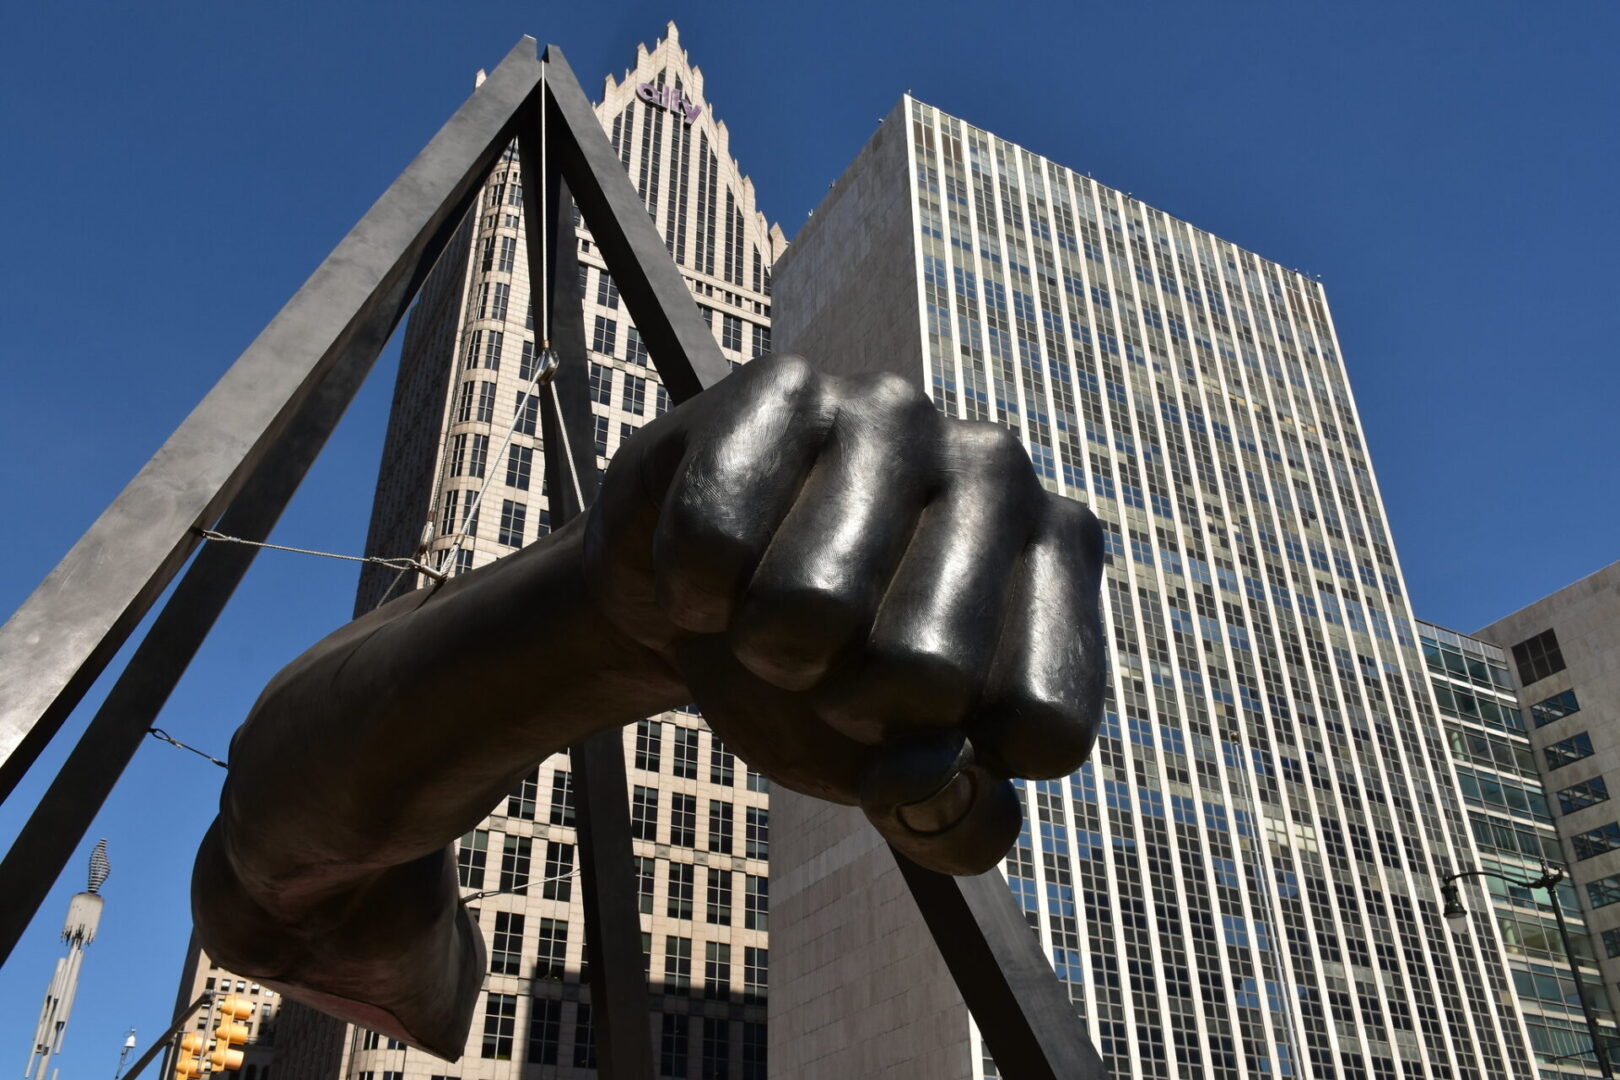 A close up of the fist on a statue